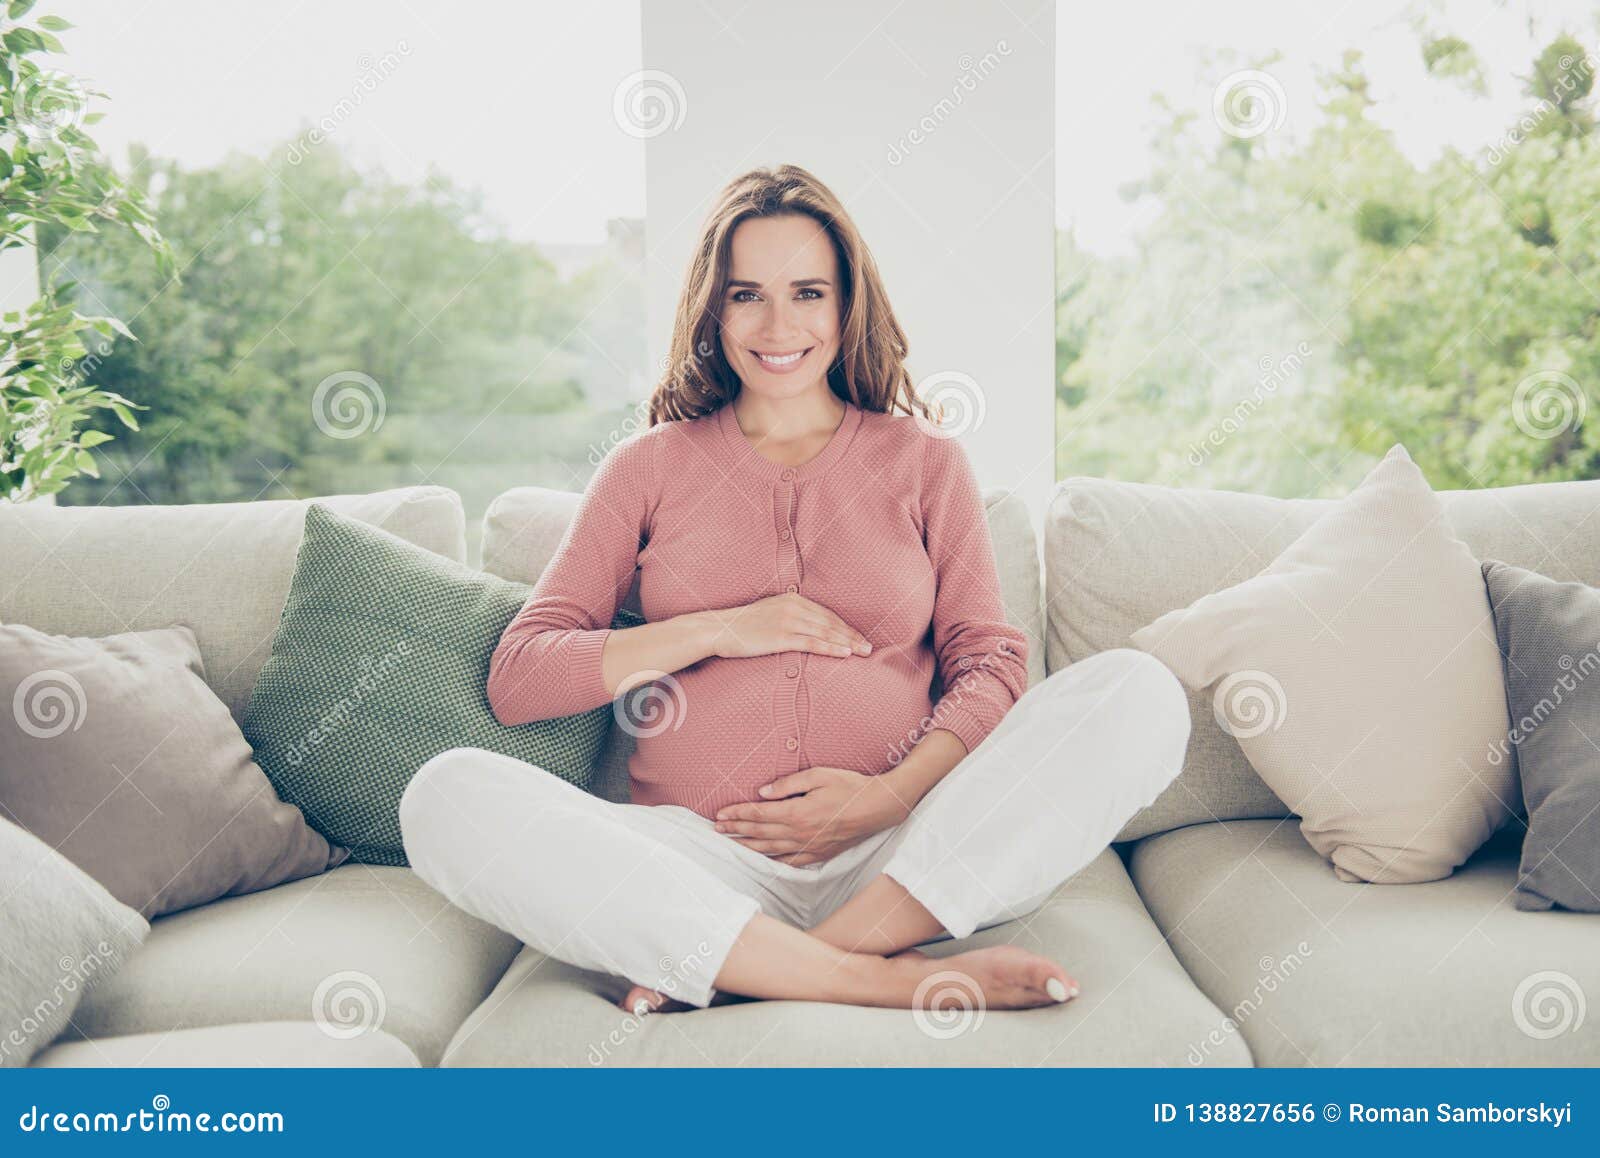 nice adorable calm lovely sweet tender beautiful pregnant curly-